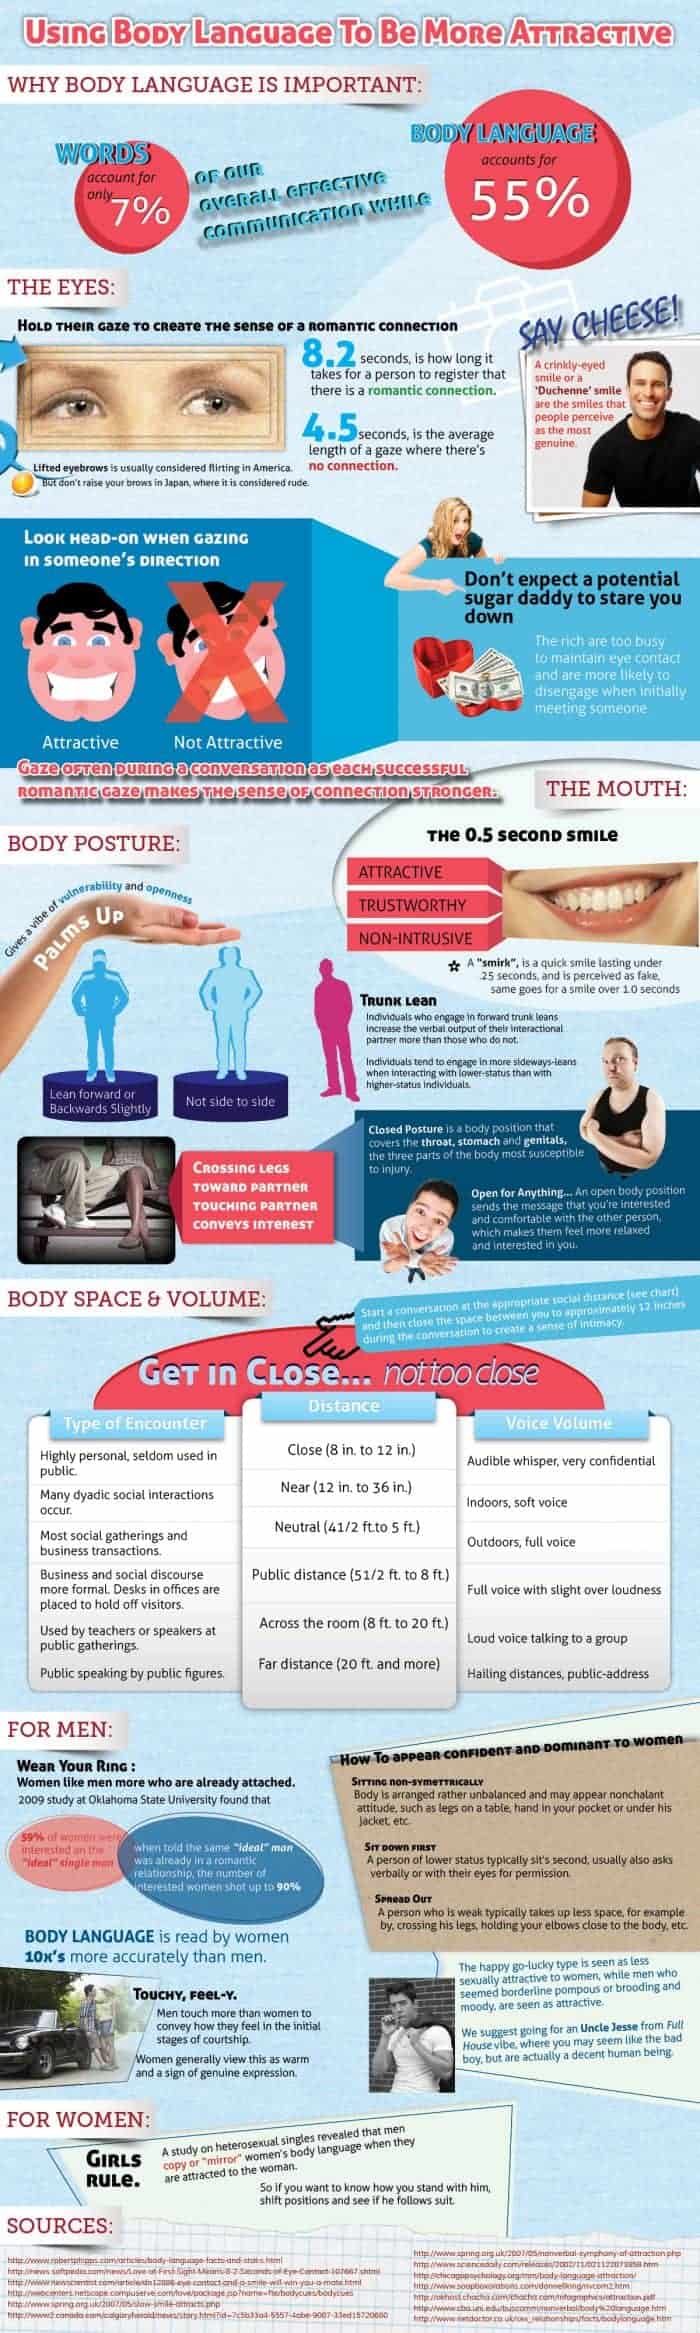 Improve Attractiveness with Body Language Infographic